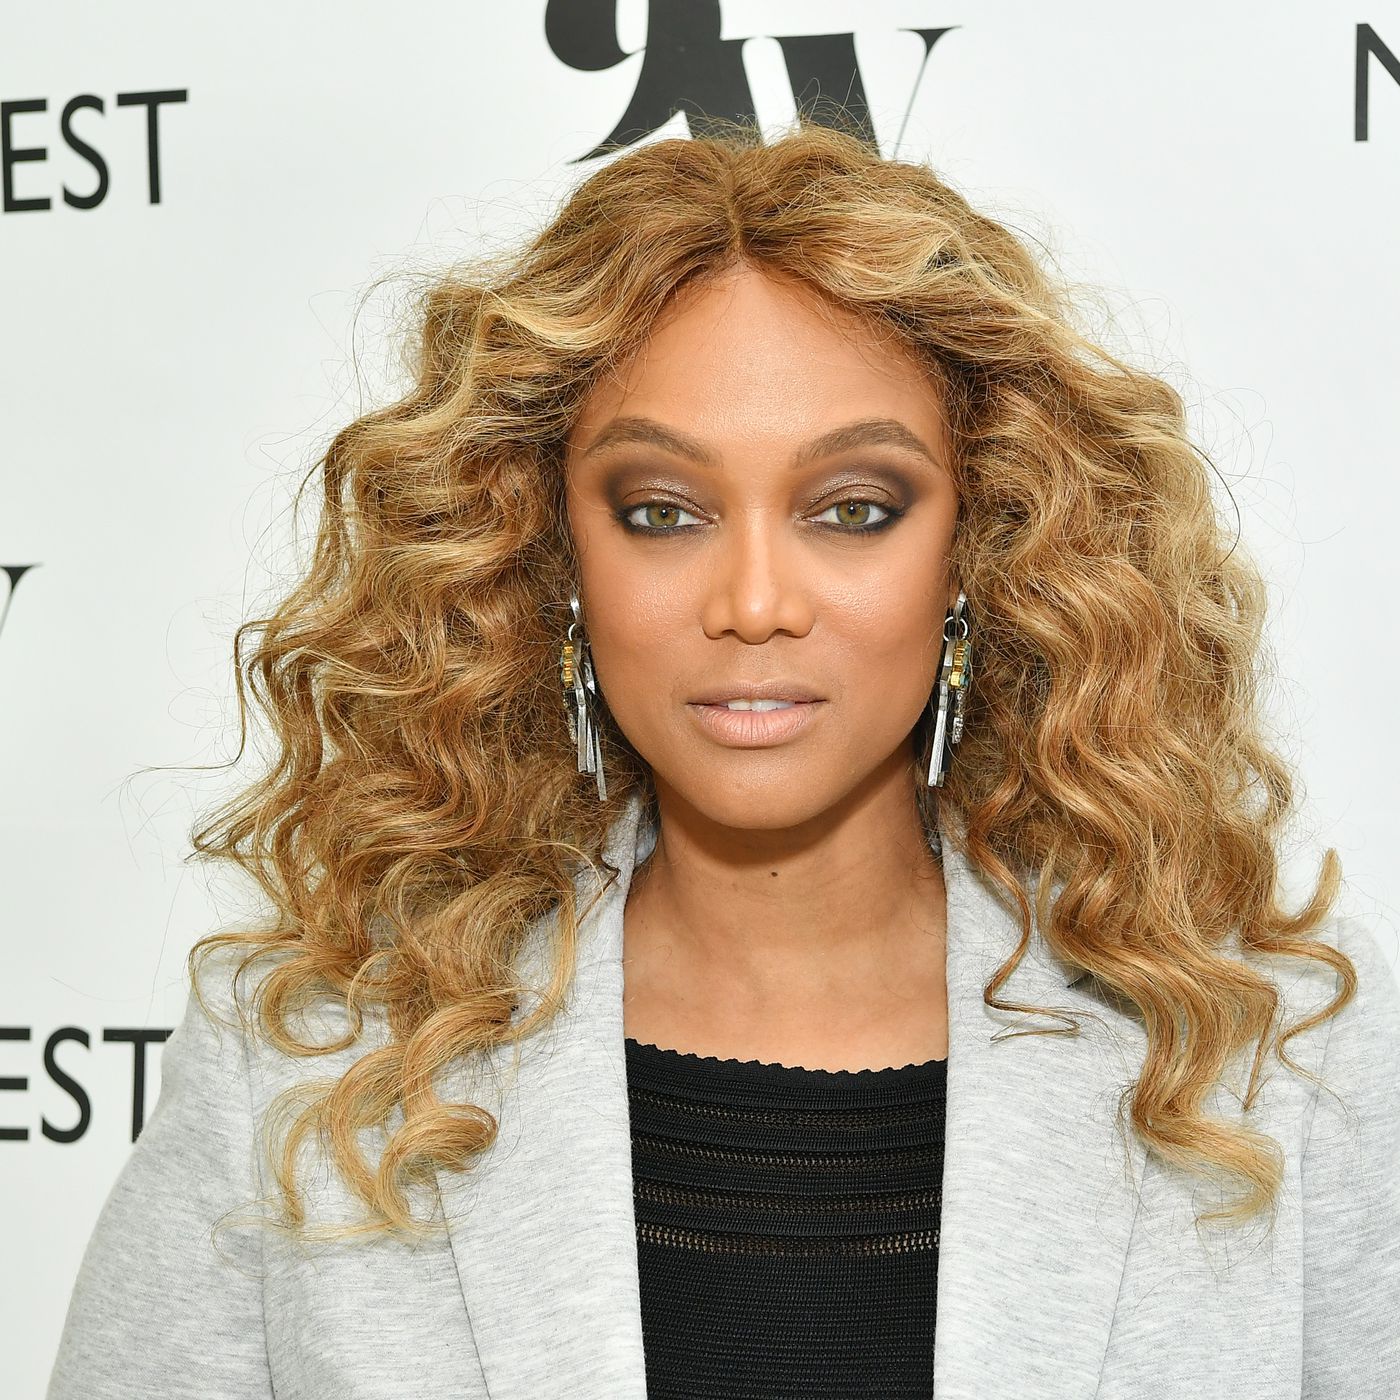 Who Is Tyra Banks Dating? Know About Her Past Relationships!